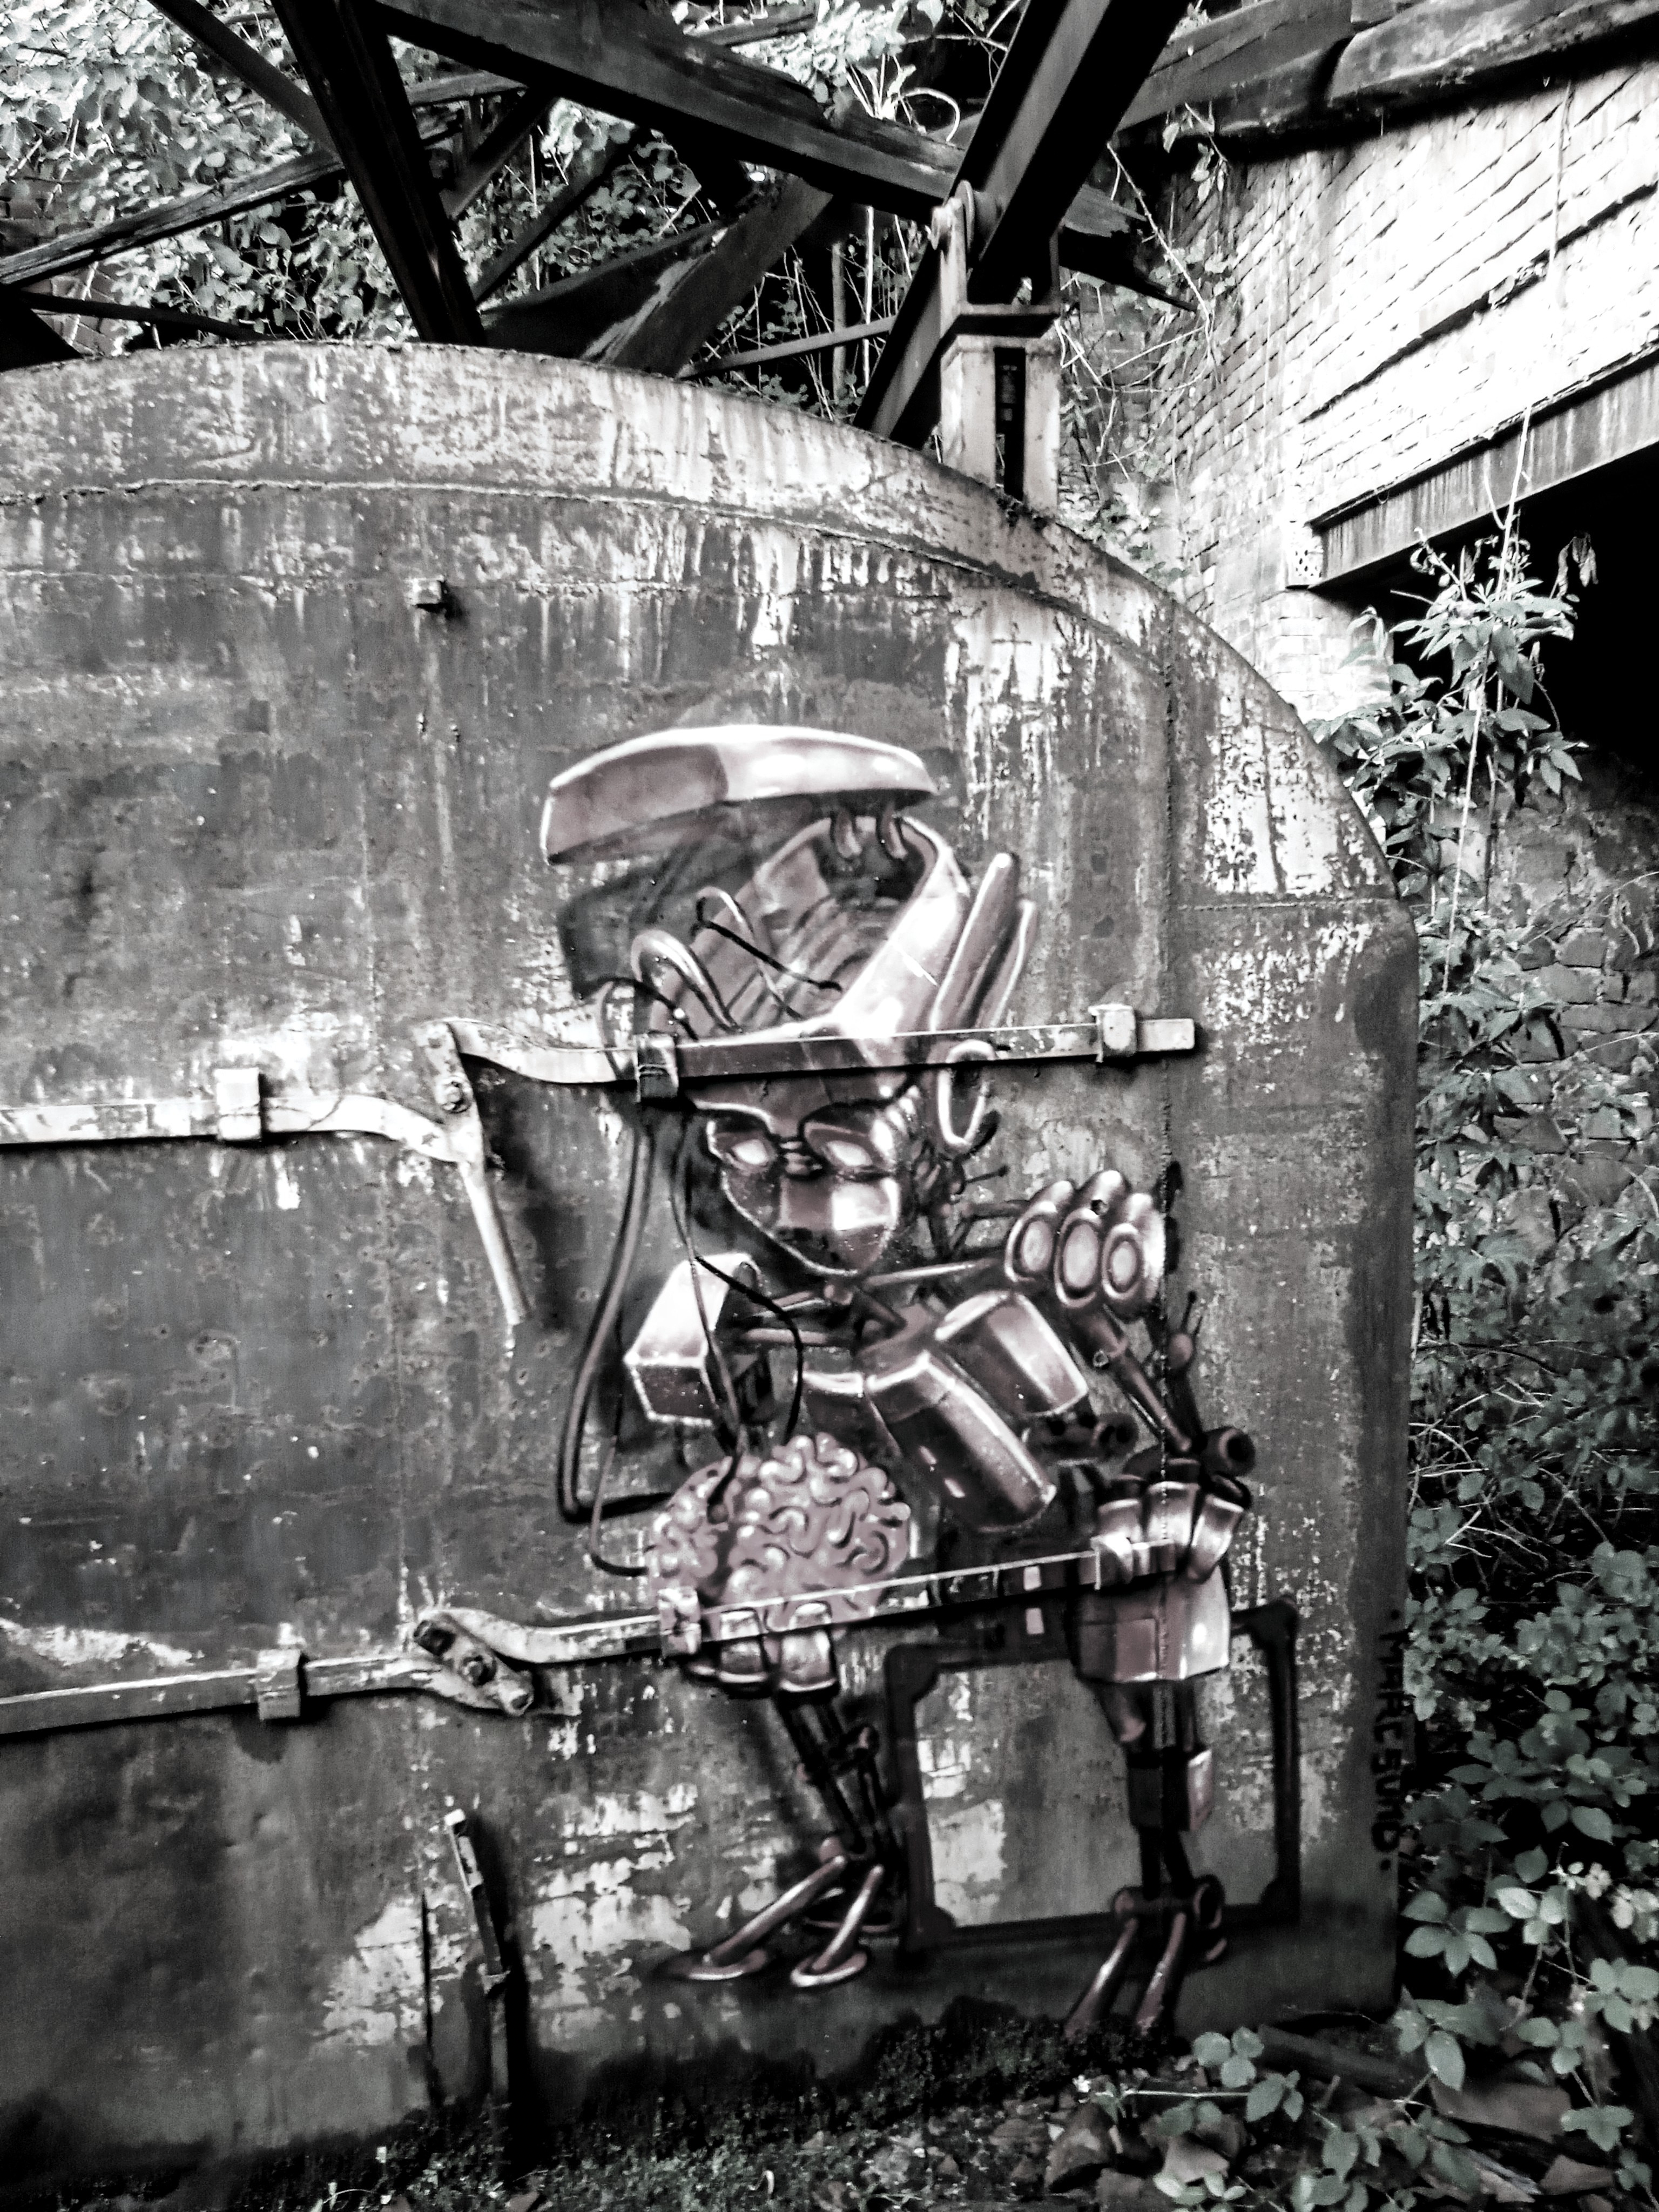 Depressed little tinker bot  ... spray paint at abandoned place in italy